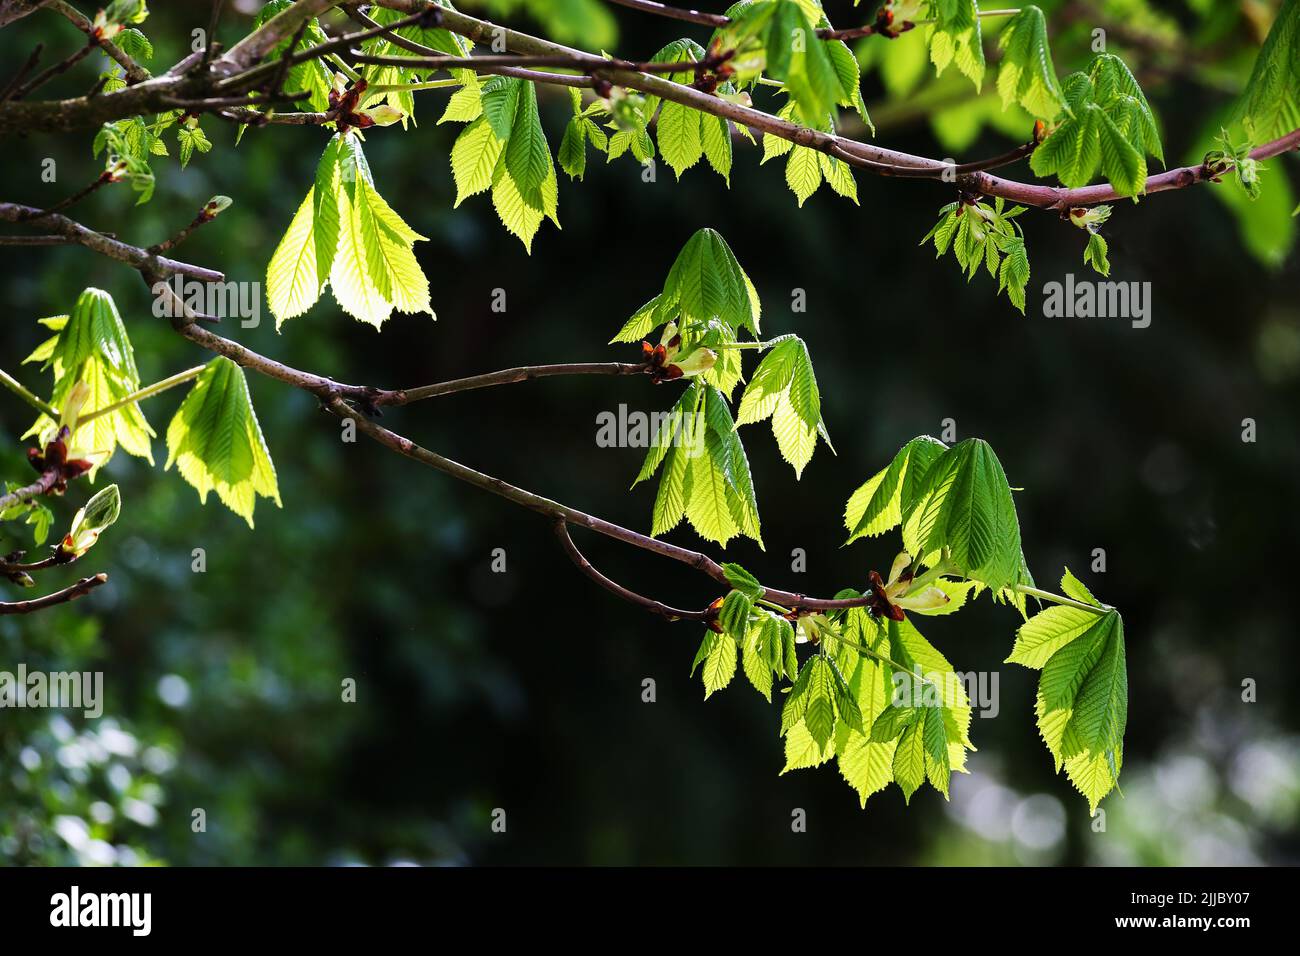 Sunlight shining through green leaves of tree showing veings. Concept of fresh growth. Dark background. Ireland Stock Photo